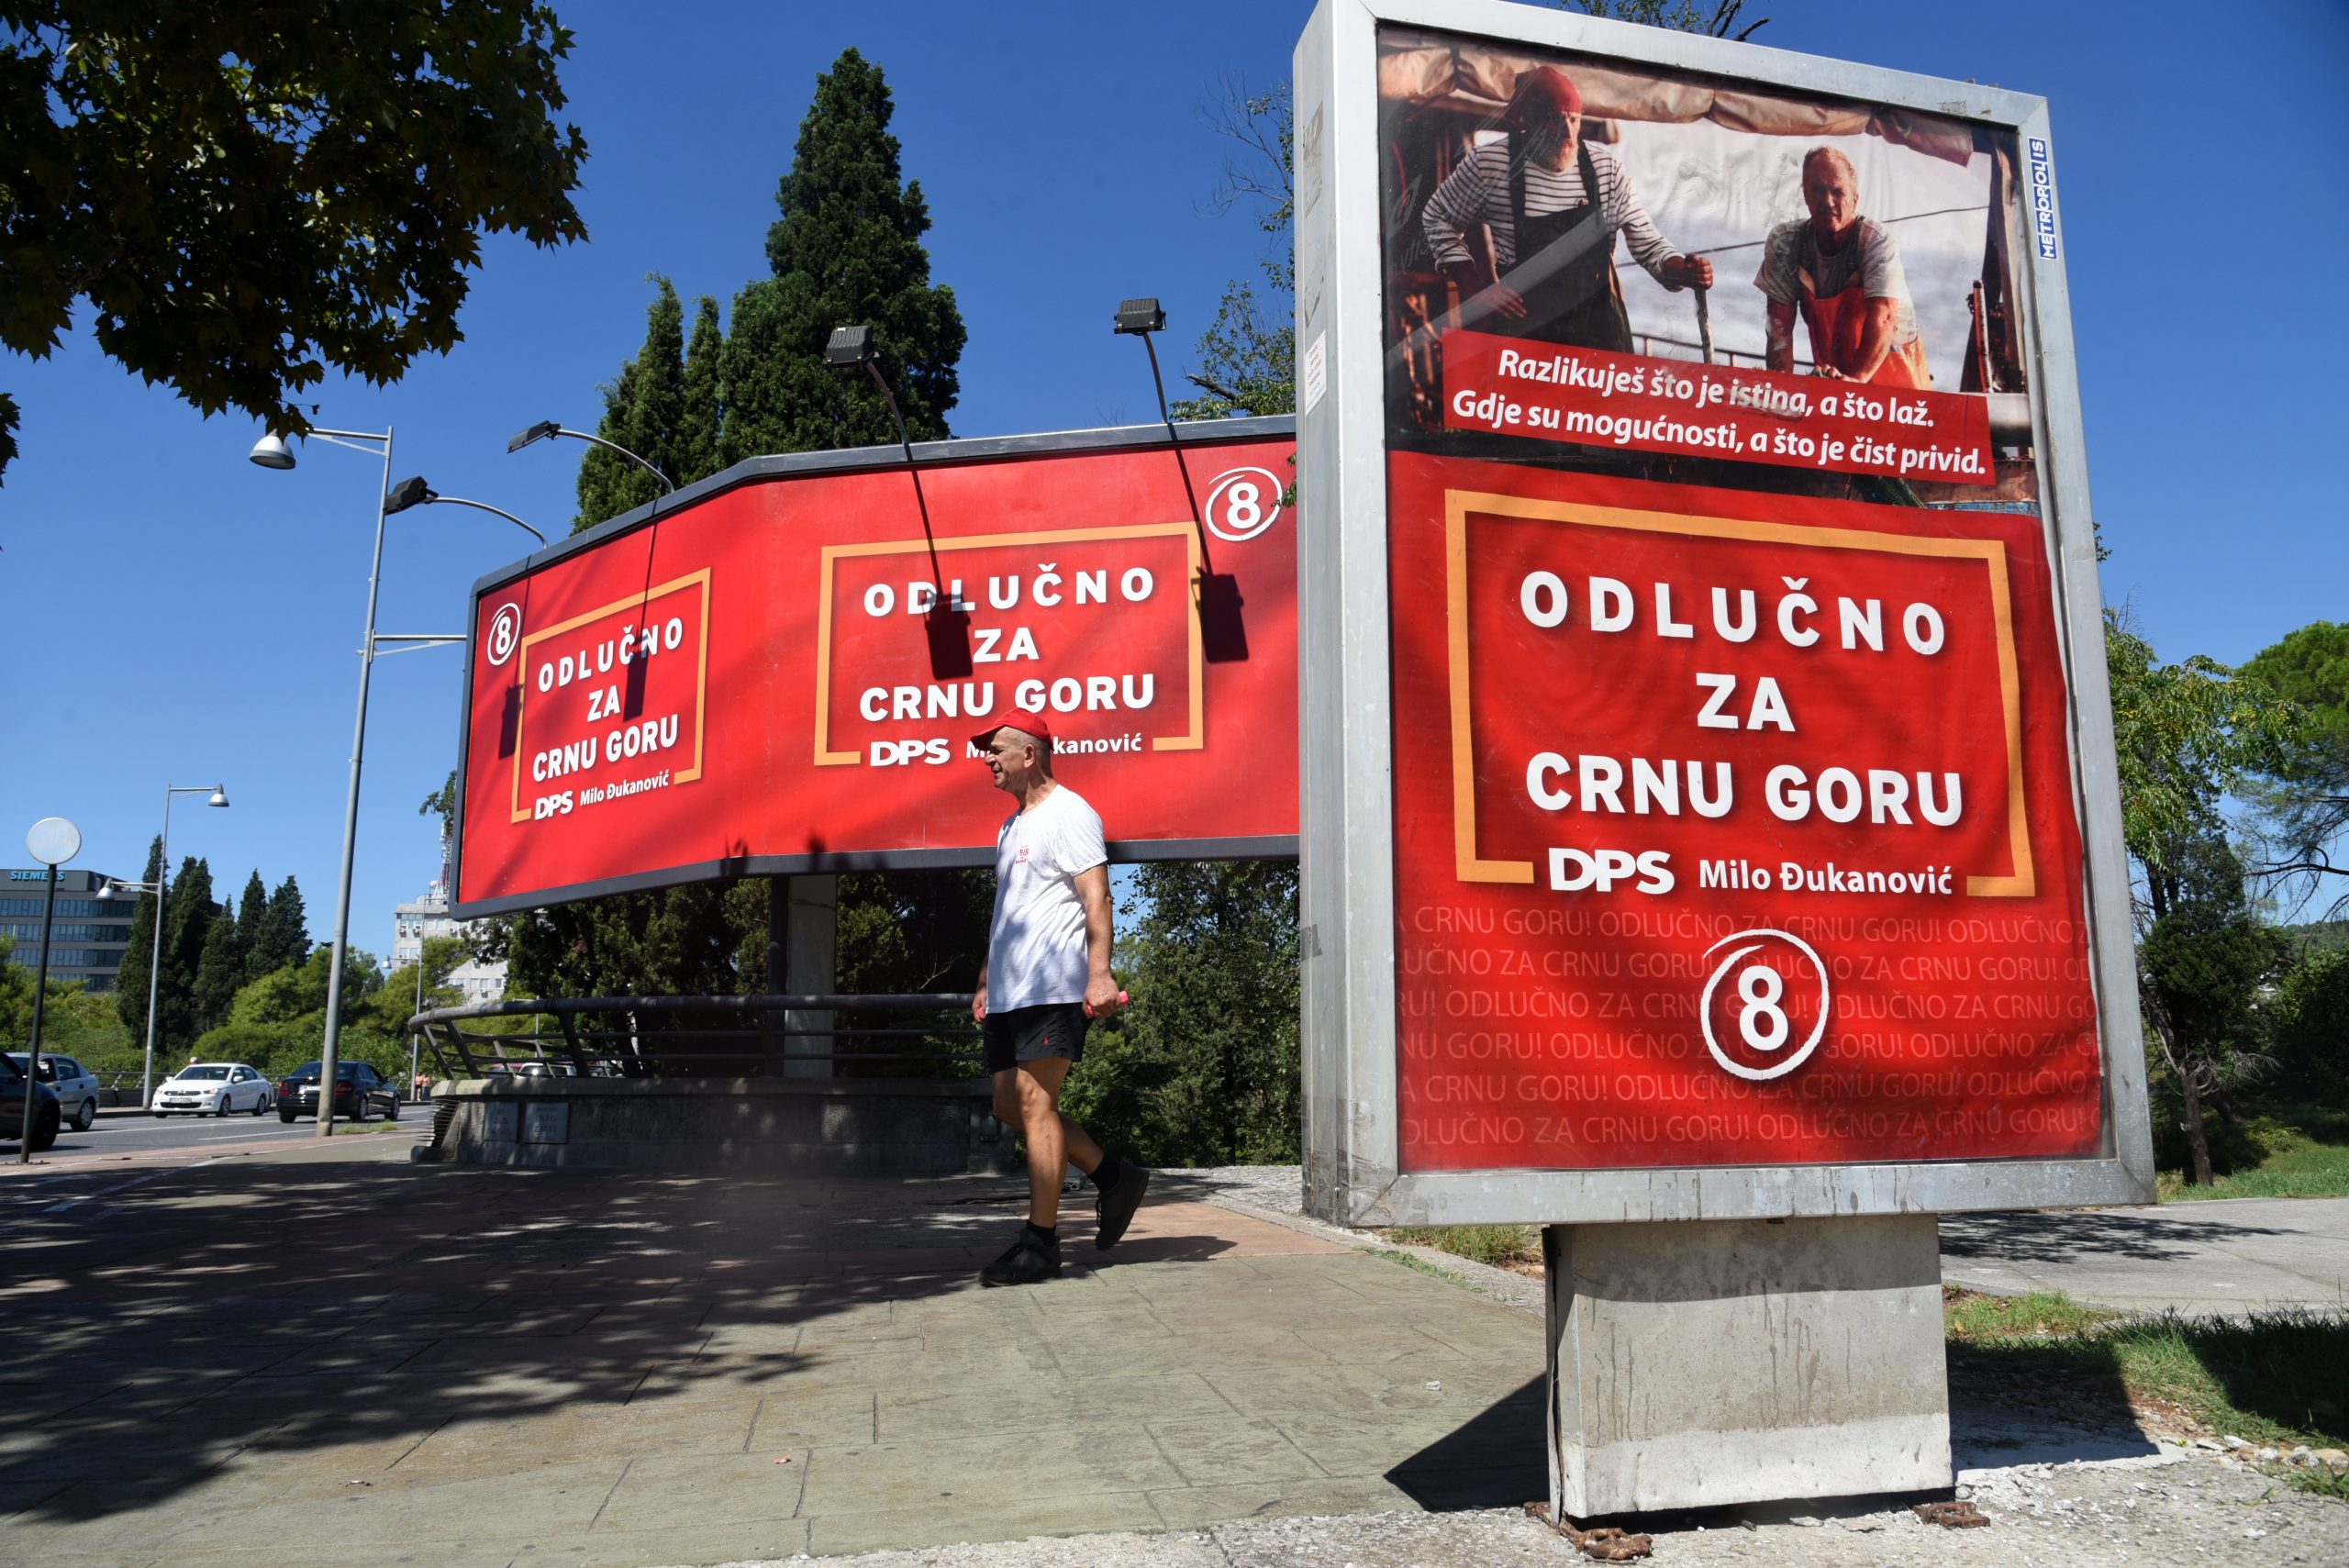 epa08629361 A man walks past a row of campaign billboards of the ruling Democratic Party of Socialists (DPS) of incumbent President Milo Djukanovic ahead of the upcoming parliamentary elections, in Podgorica, Montenegro, 27 August 2020. Parliamentary elections are due to be held in Montenegro on 30 August 2020.  EPA/BORIS PEJOVIC